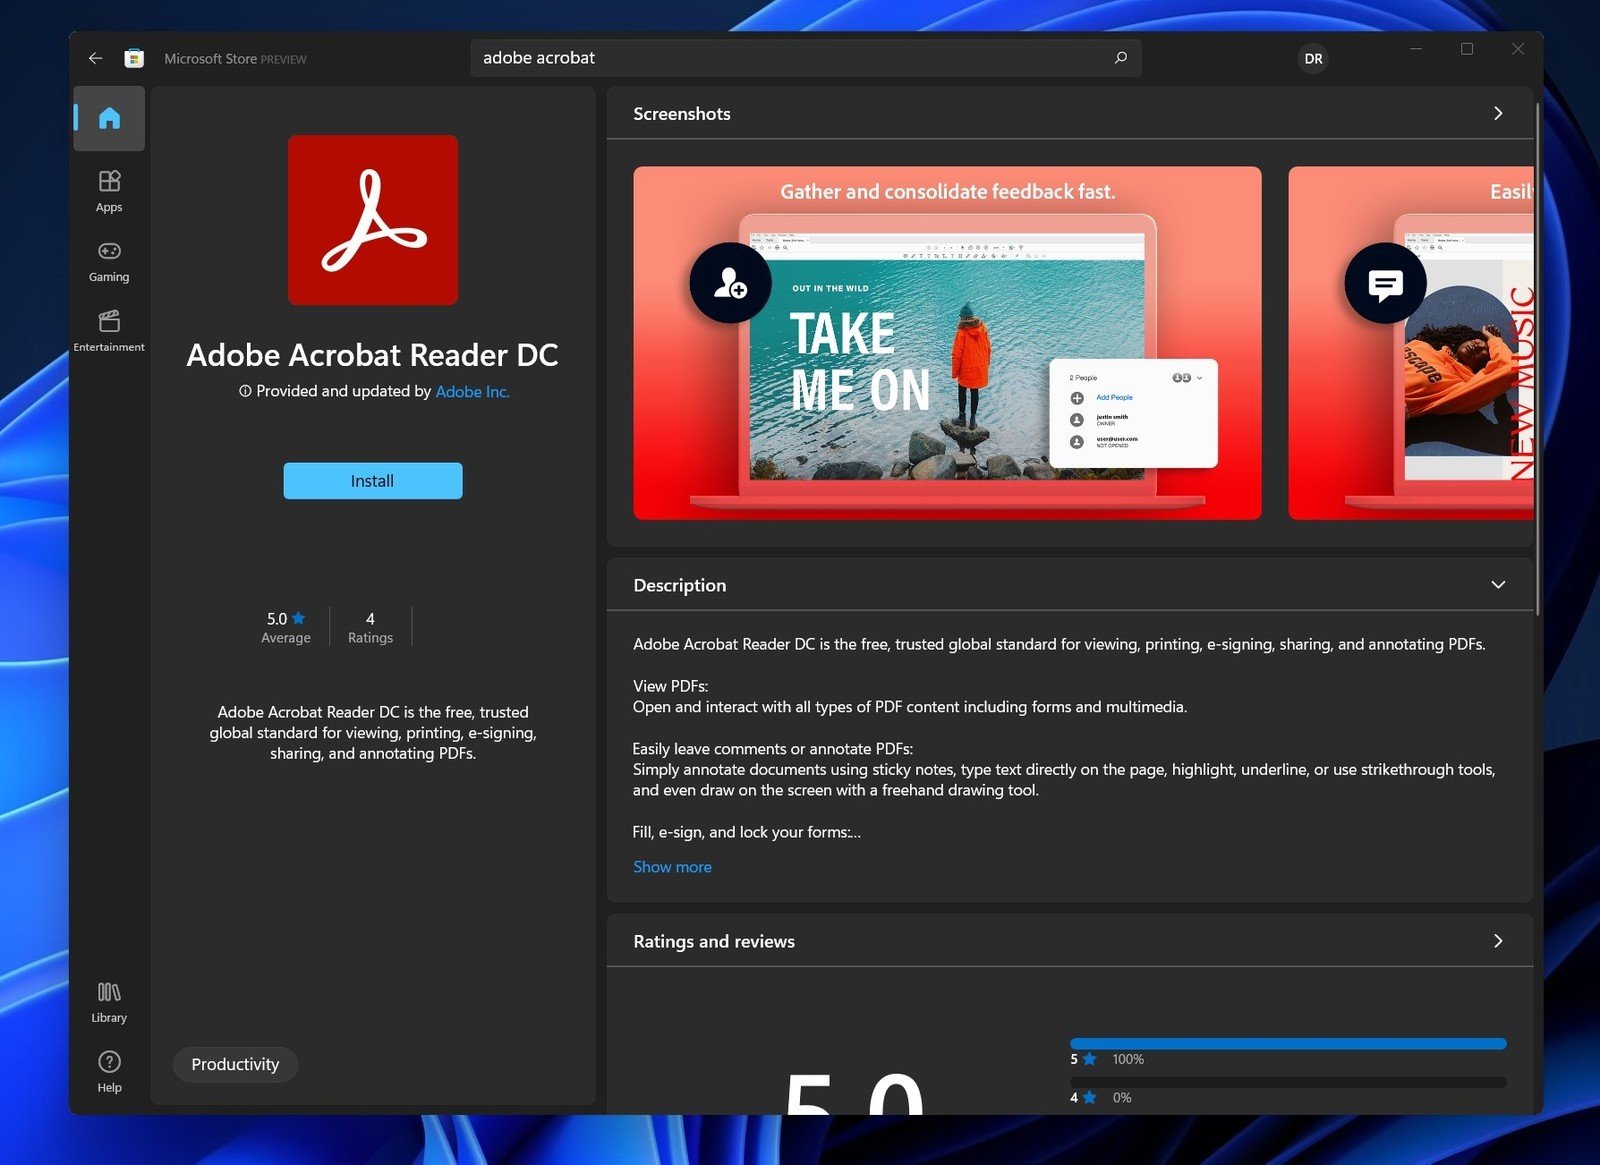 Daniel Rubino on X: "Another "classic" Win32 app, Adobe Acrobat Reader DC,  drops into the new Microsoft Store for Windows 11. It's just one of many  full apps being put onto the